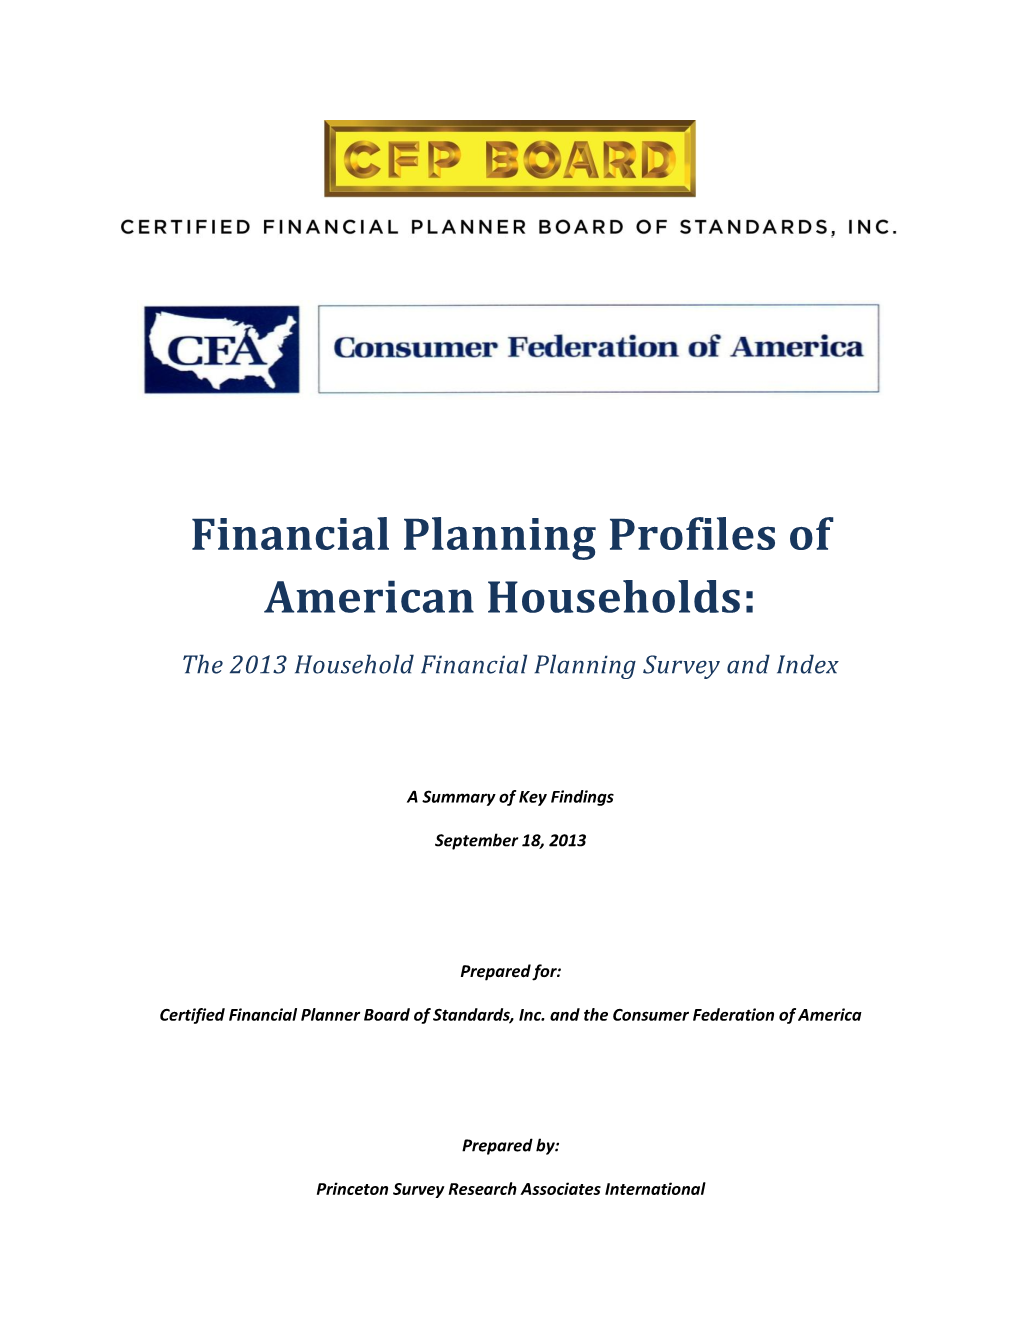 Financial Planning Profiles of American Households